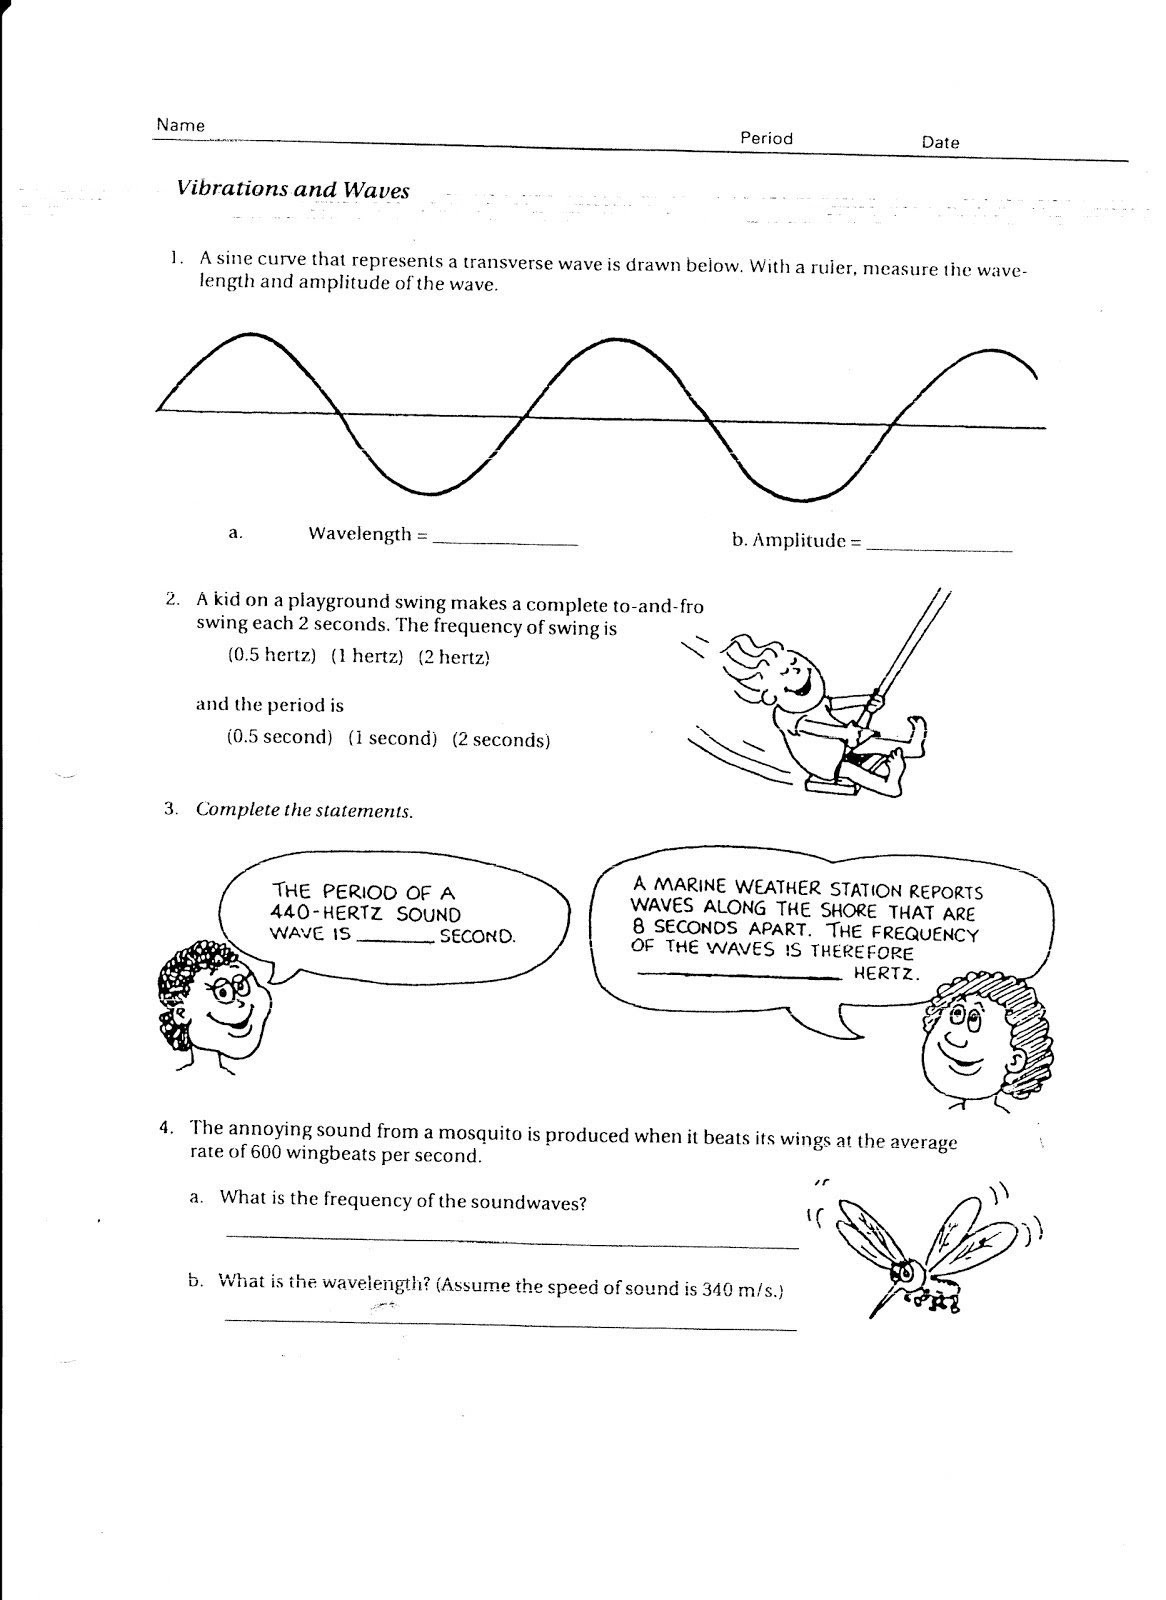 Electromagnetic Spectrum Worksheet Answers Waves sound and Light Answer Key Philips Blue Icicle Lights